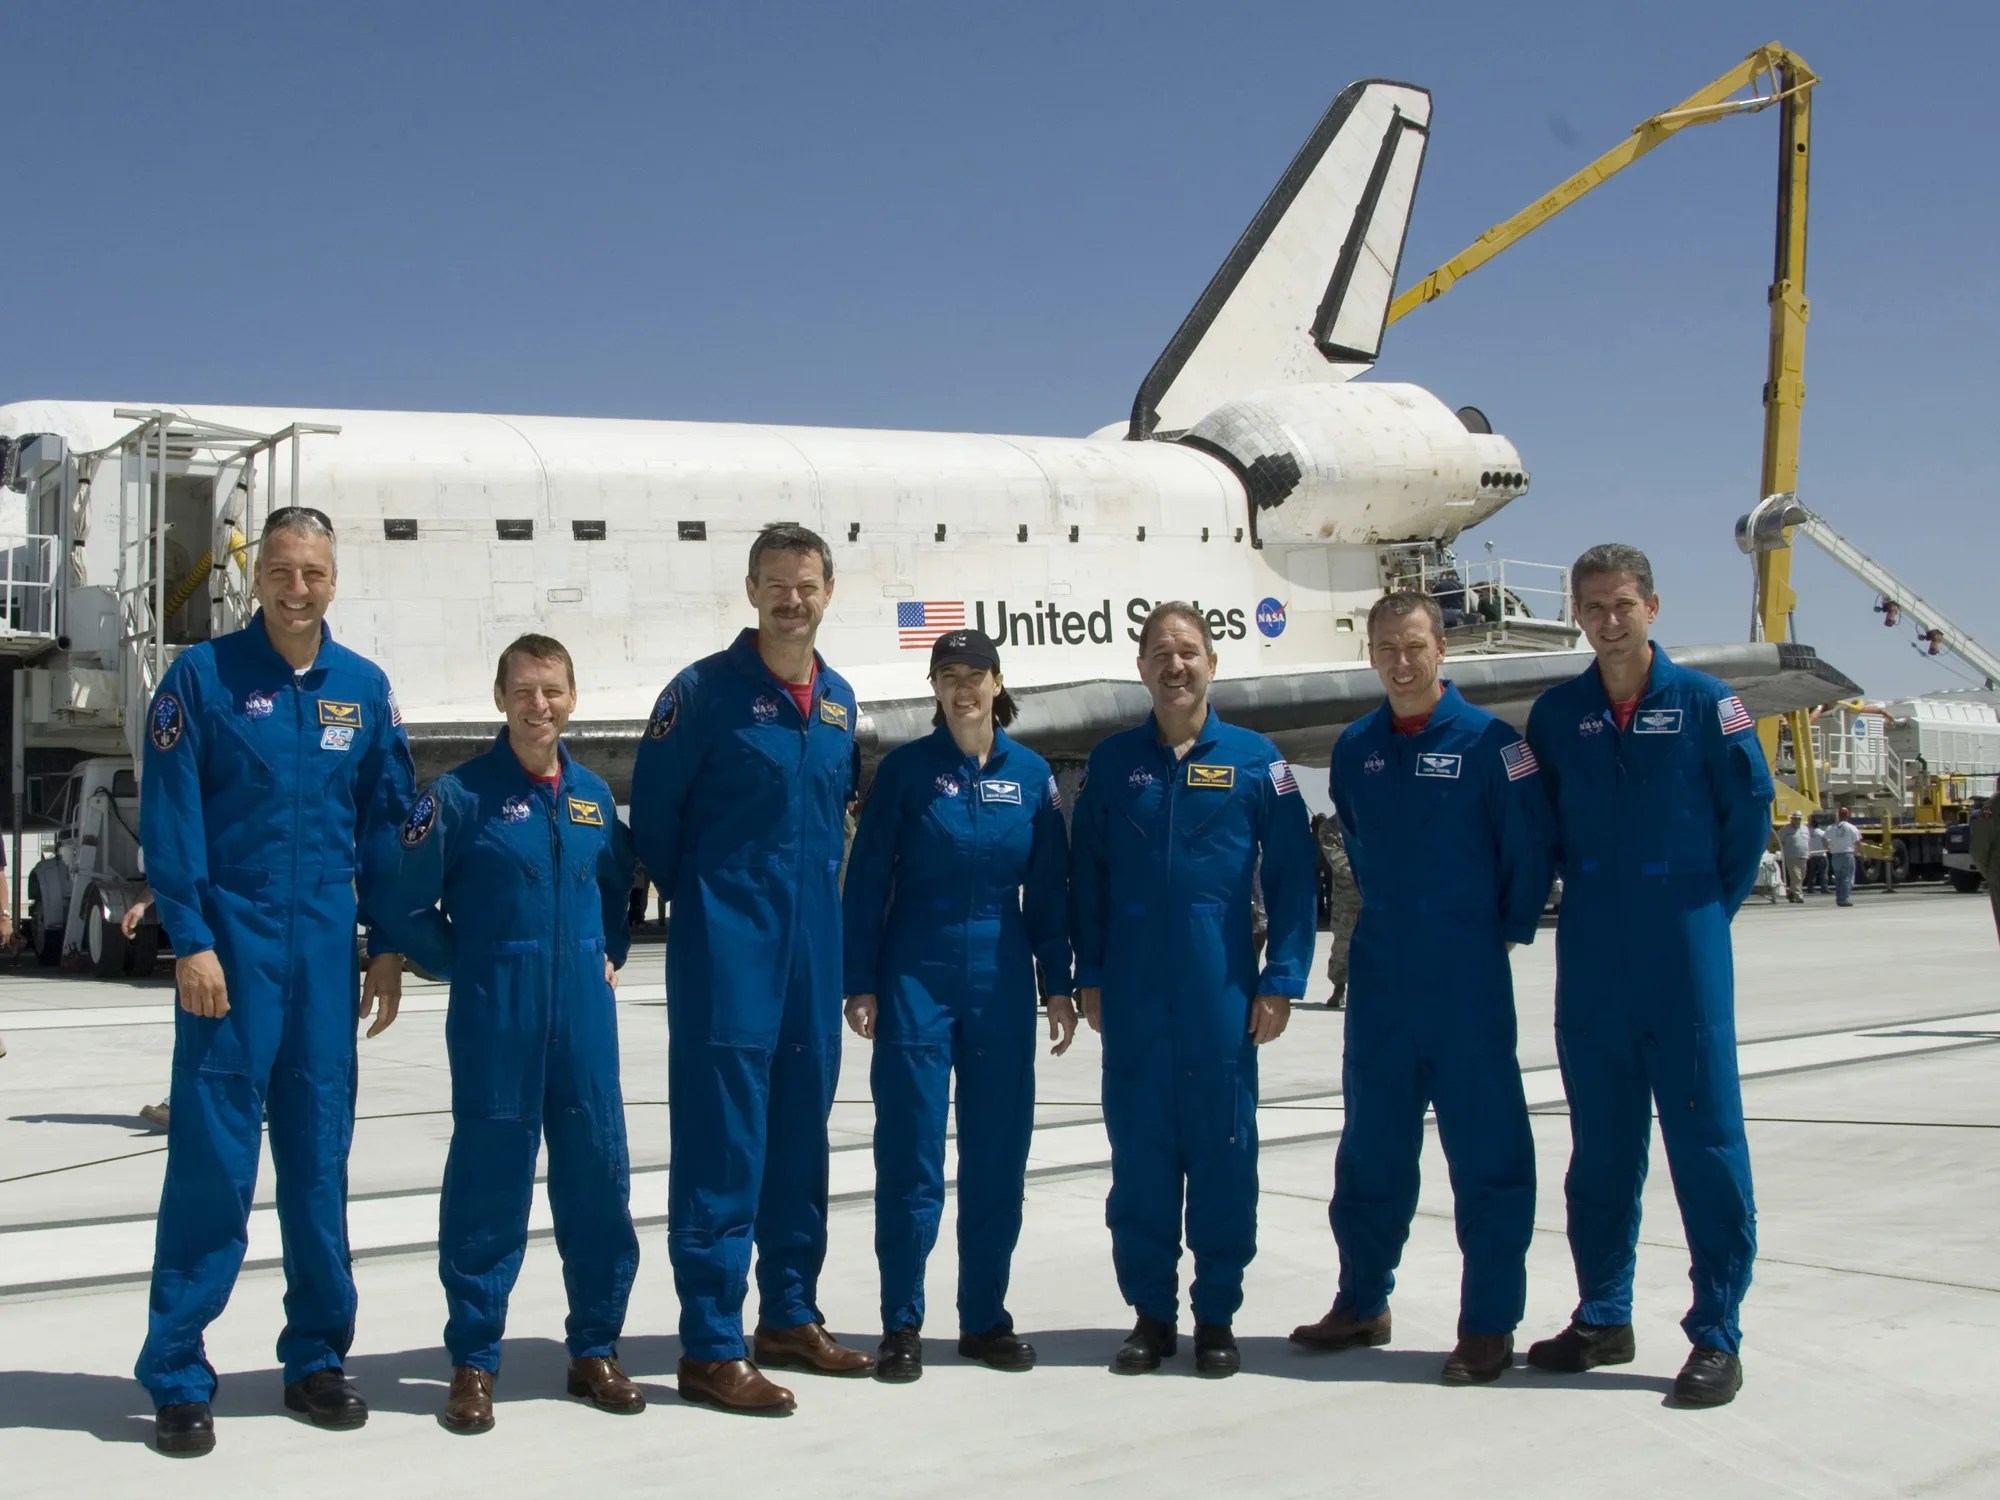 The crew of space shuttle mission sts-125 gathered on the runway after the shuttle atlantis landed.